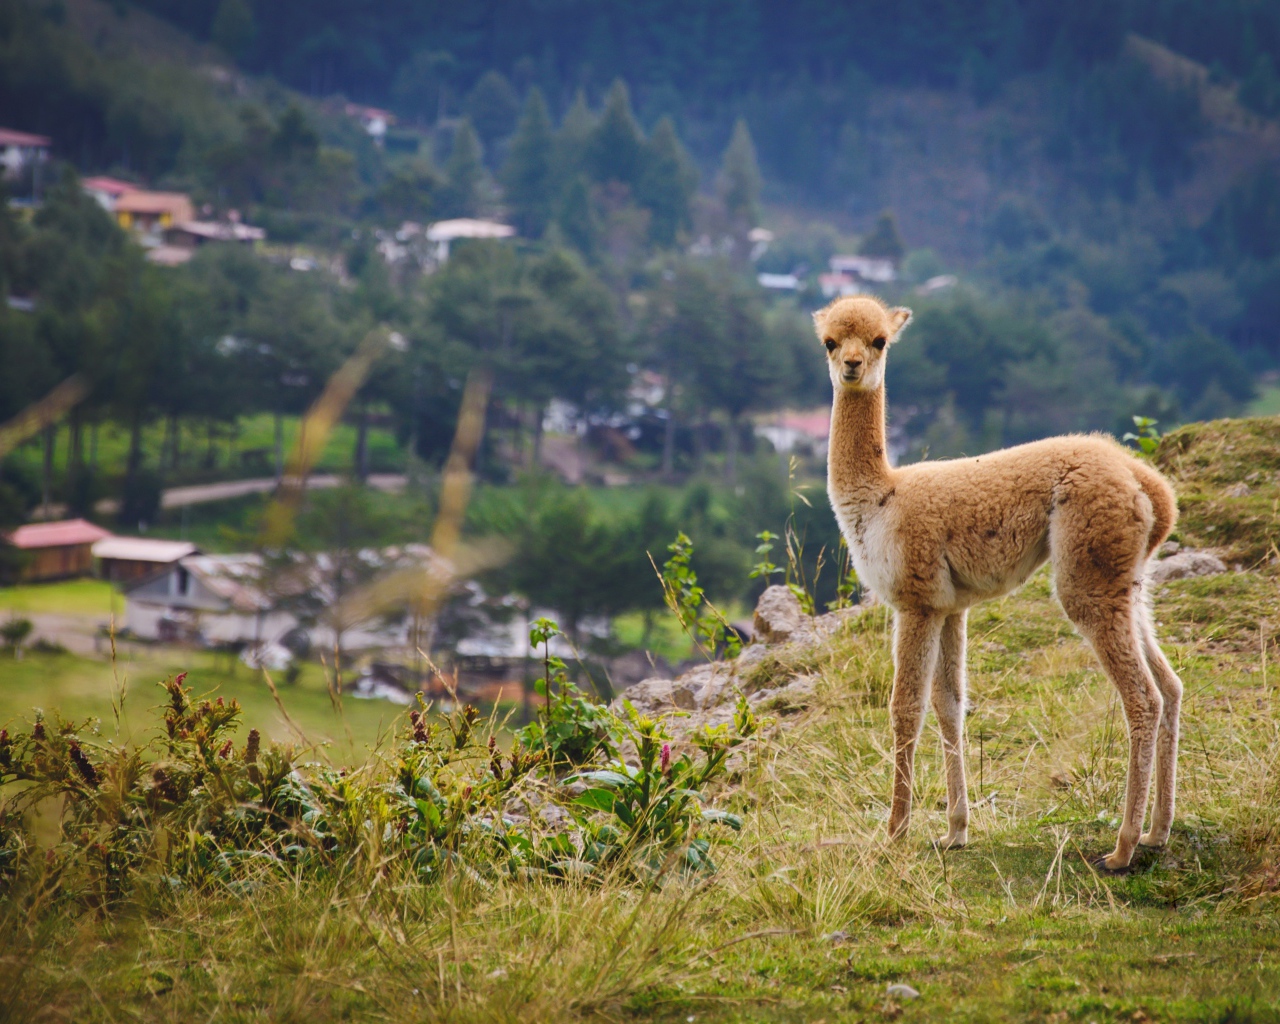 Little vicuna grazing on the grass